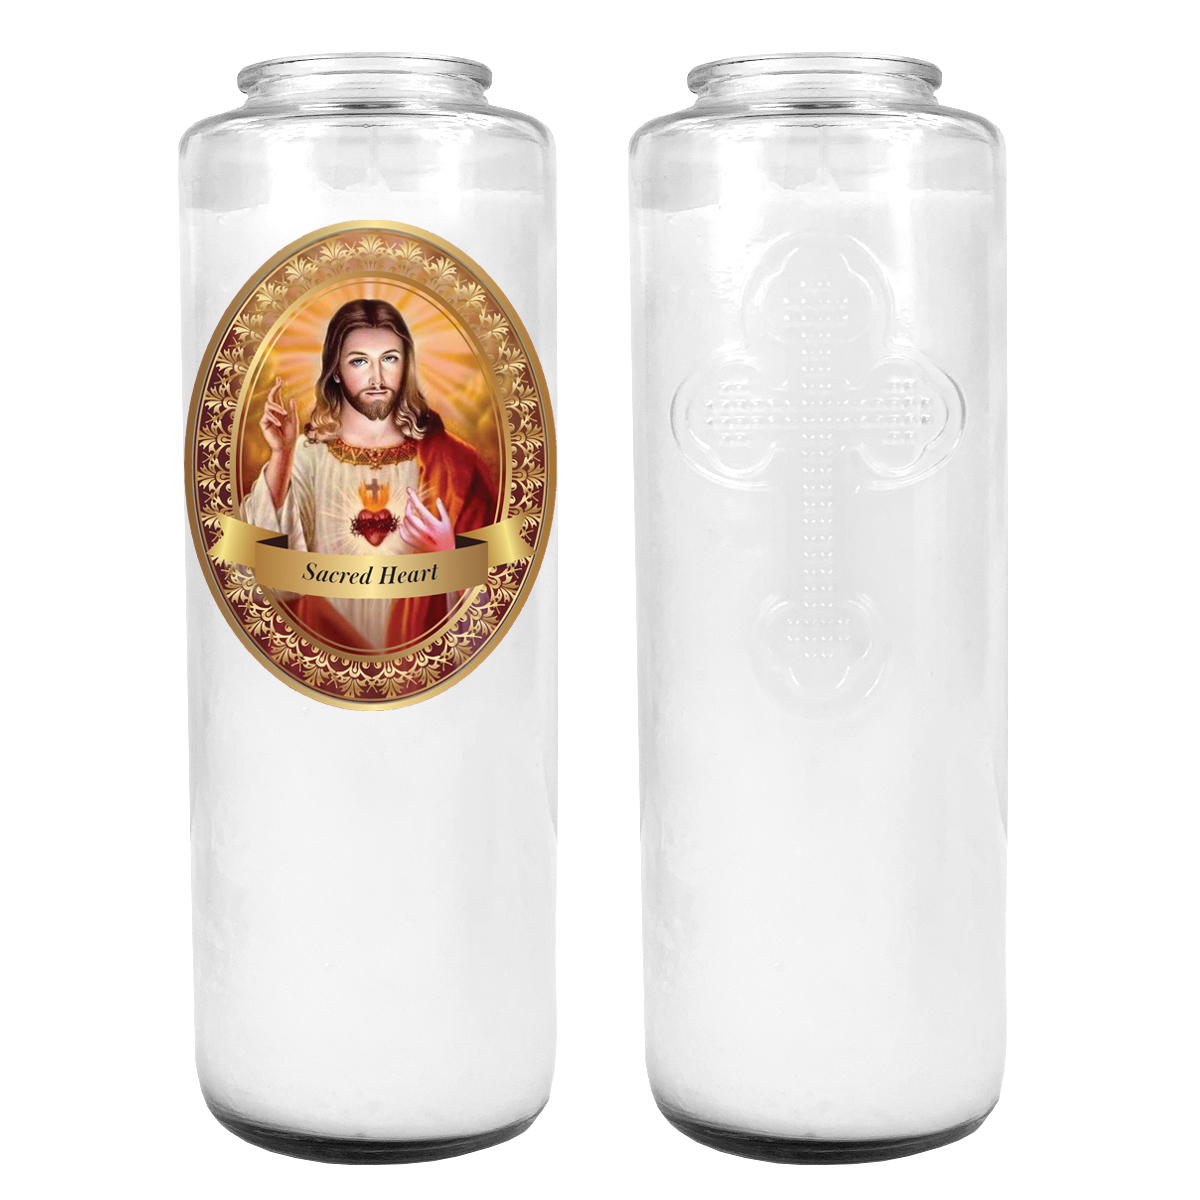 SACRED HEART 6 DAY CANDLE W/ REMOVABLE LABEL